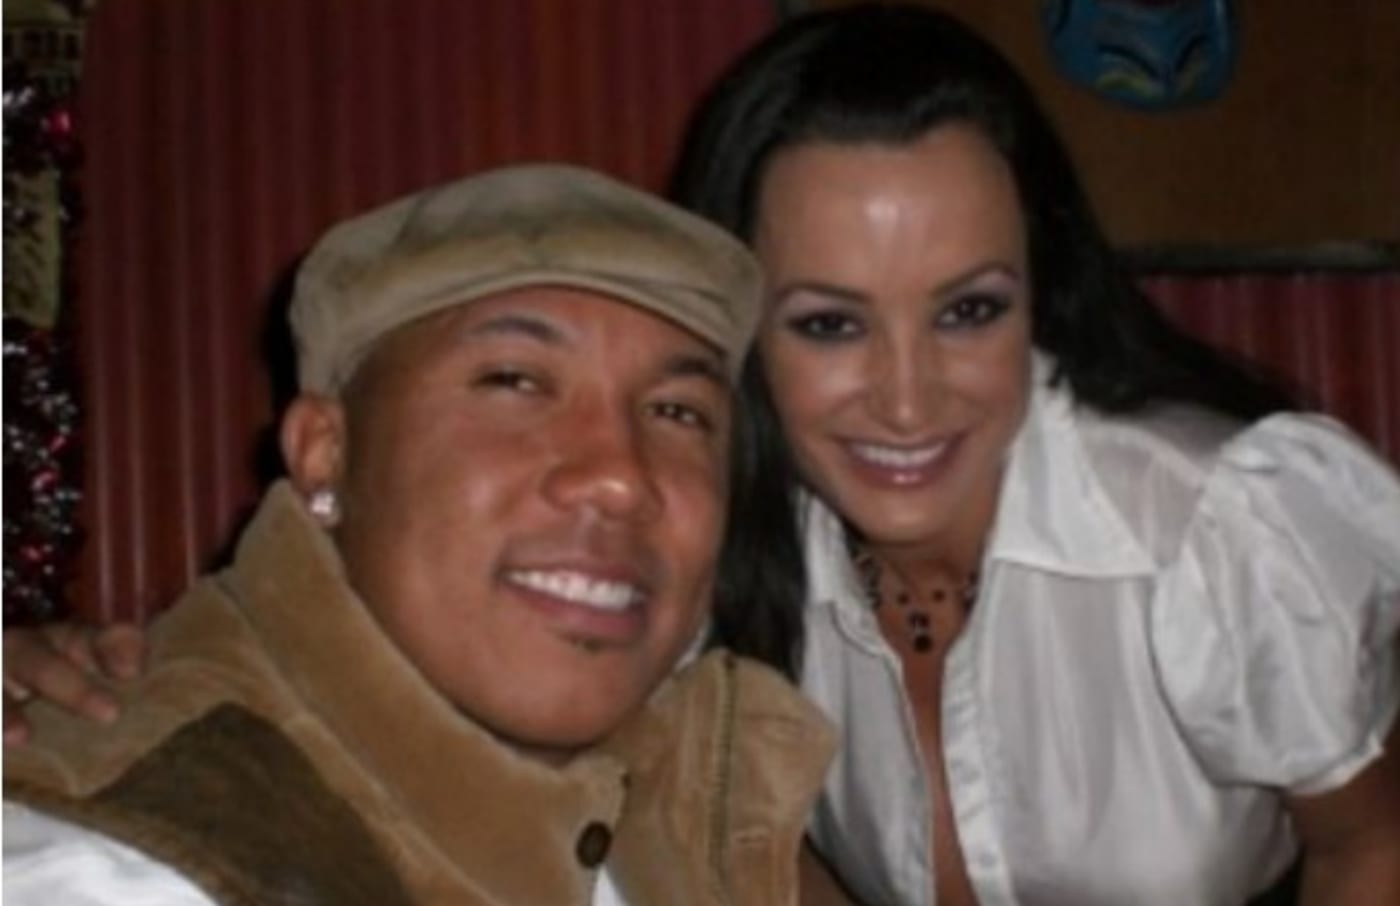 Sleeping Lisa Ann - A History of Athletes (Allegedly) Dating Adult Film Stars | Complex